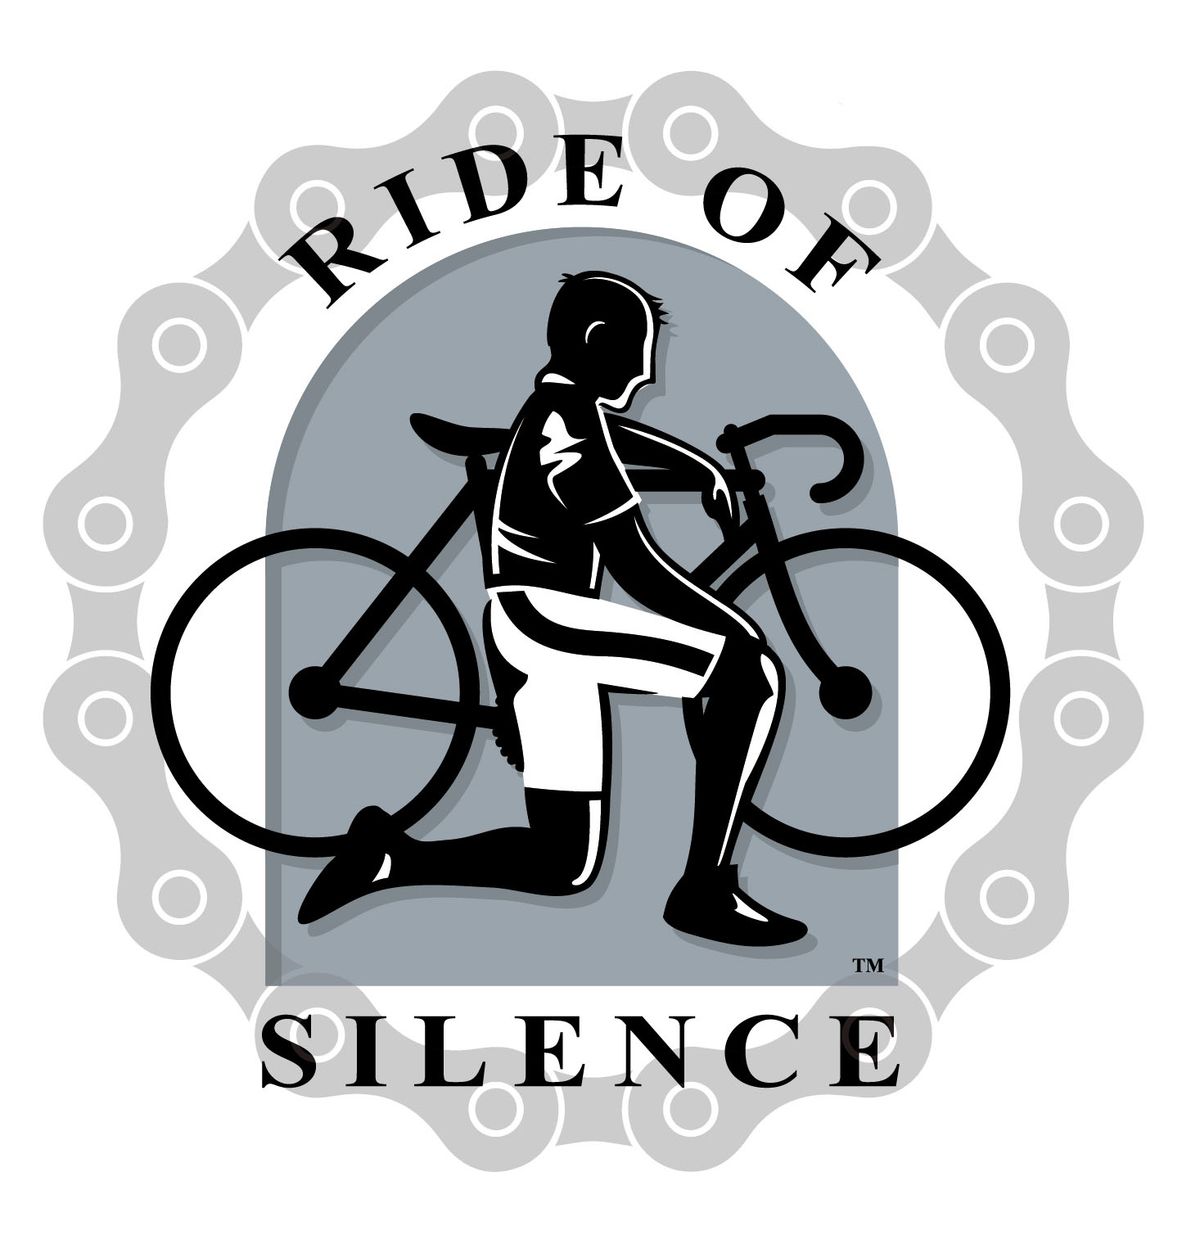 Ride of Silence 2024